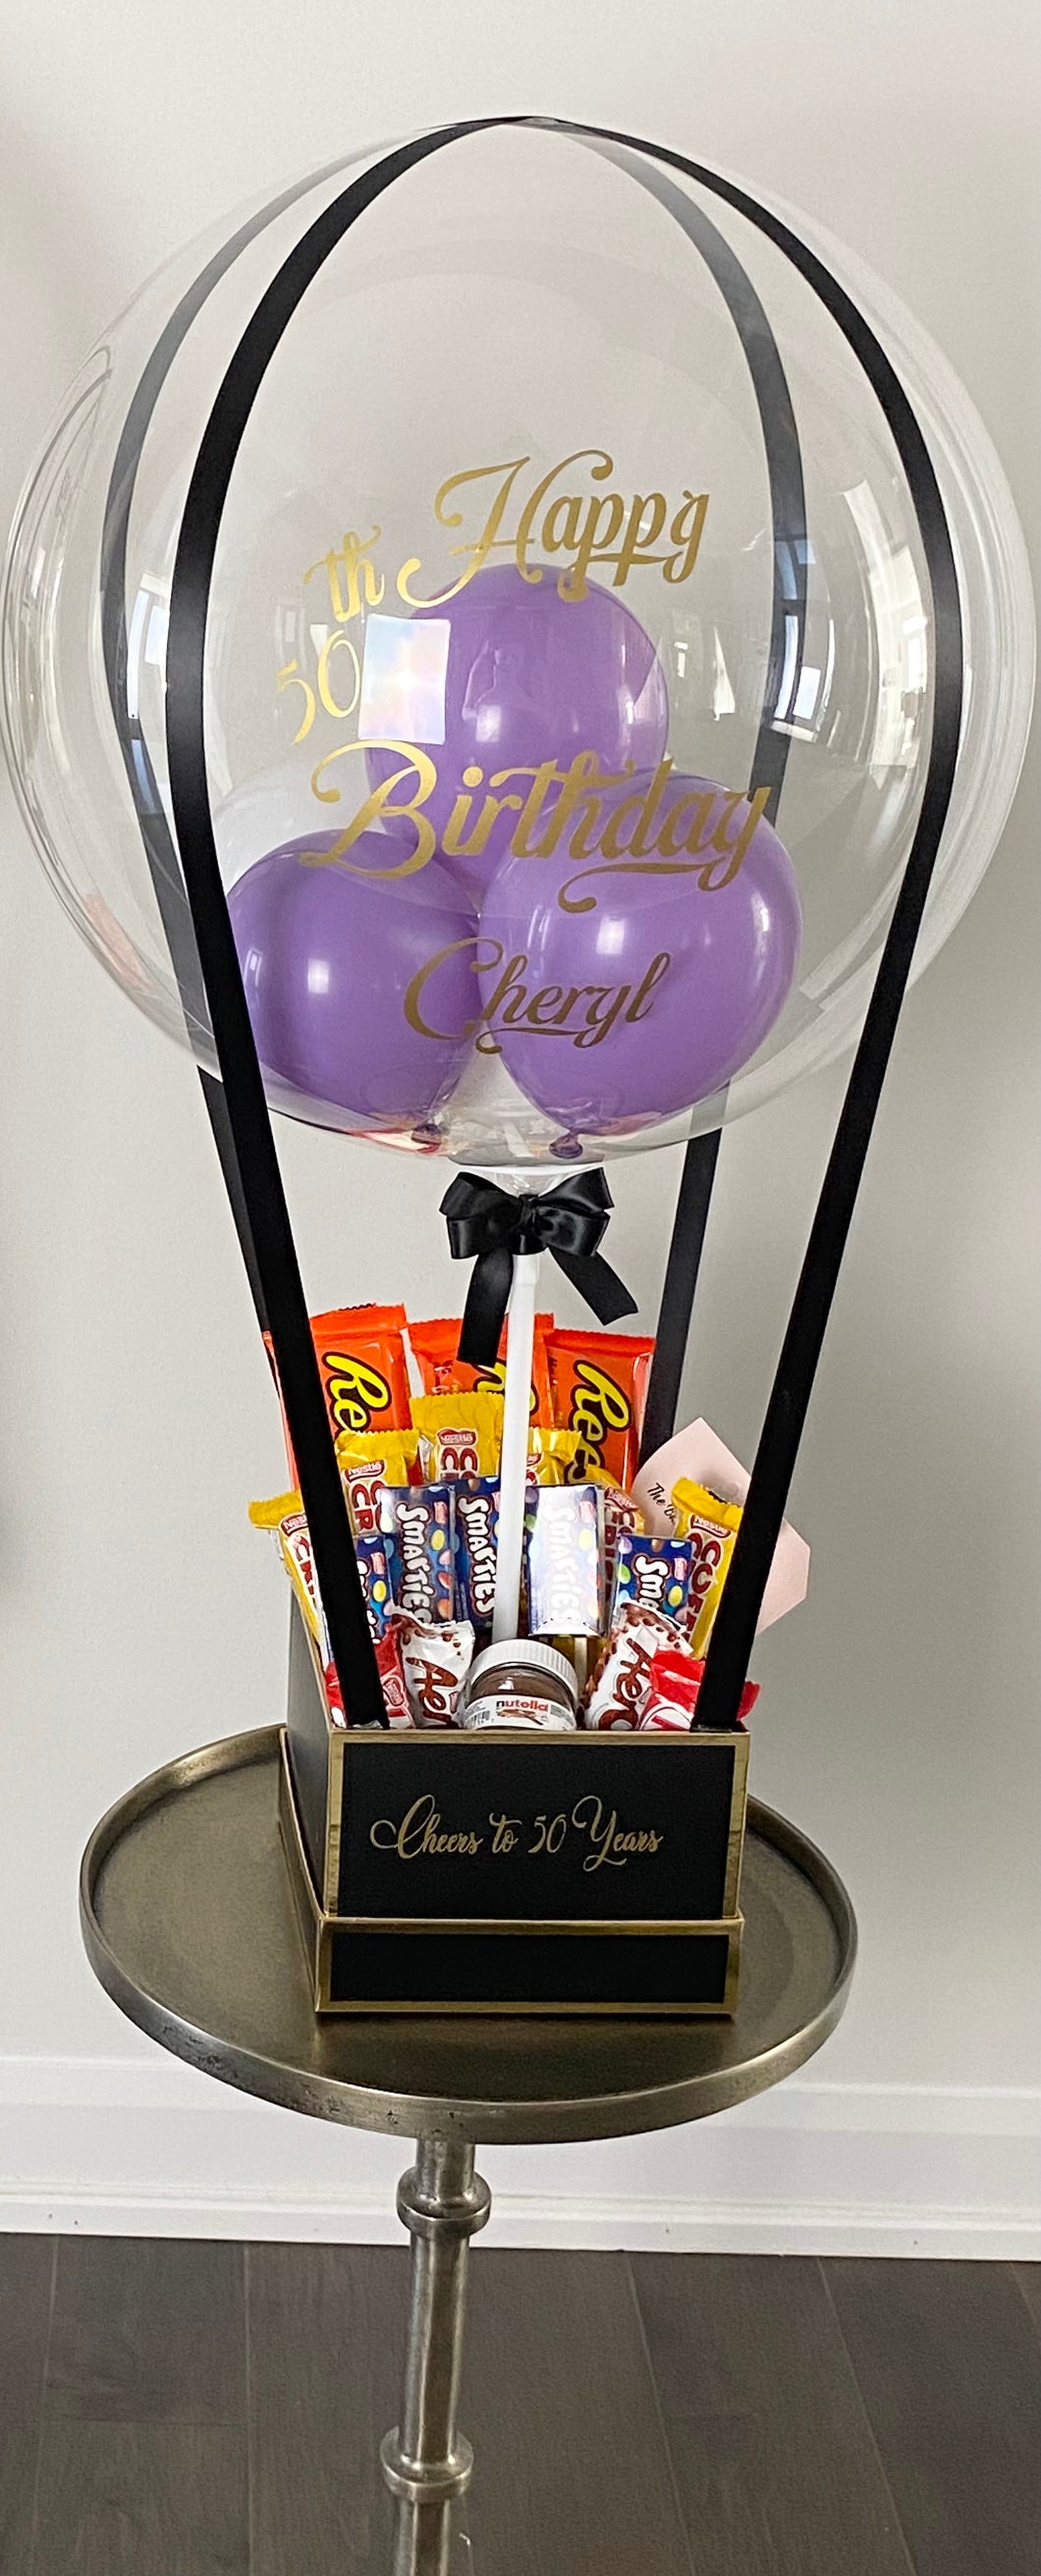 Customized Hot Air Balloon (Chocolate/Candy Bars Only)